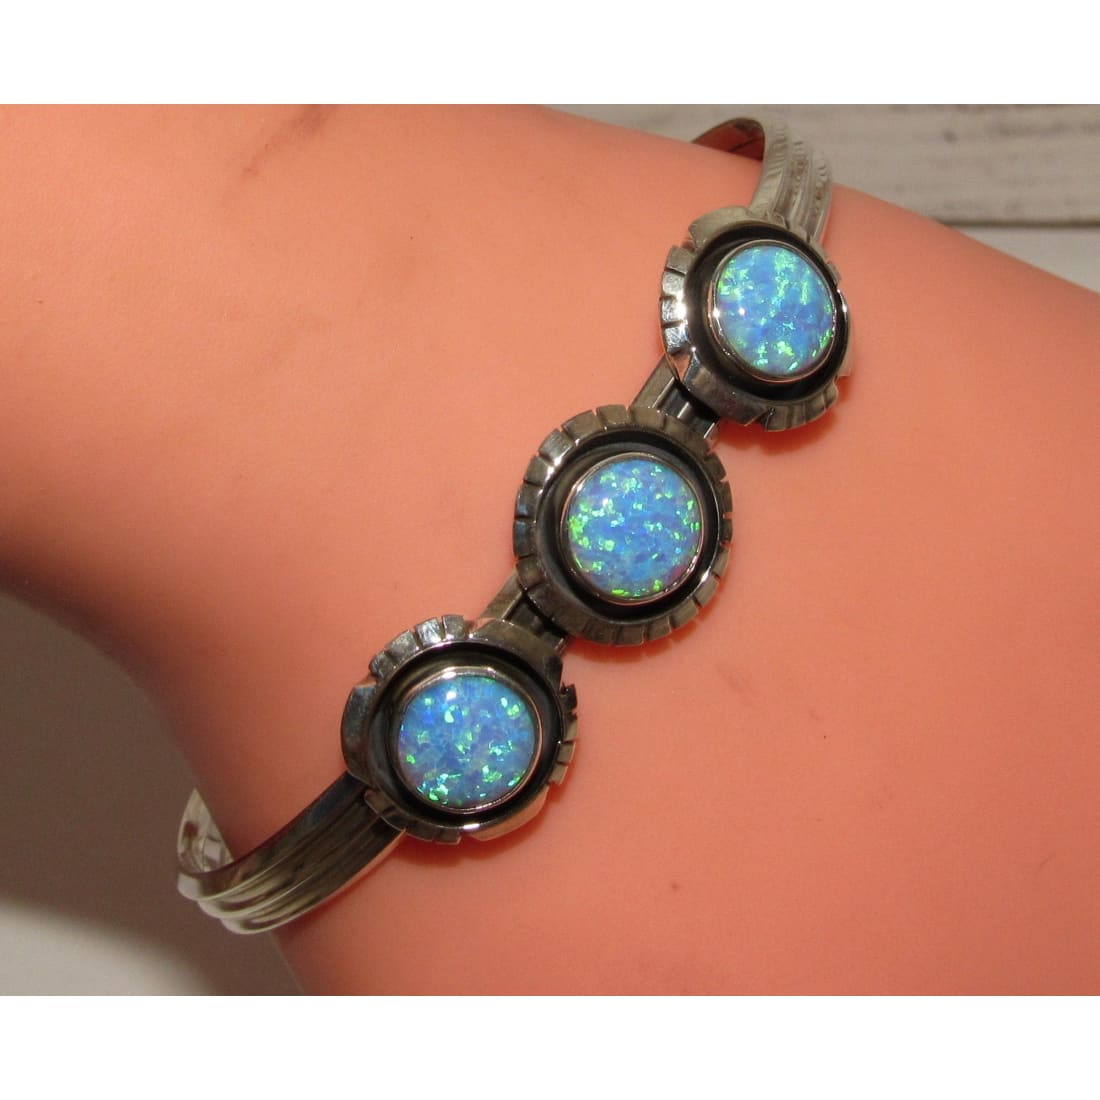 Navajo Opal Bracelet Sterling Silver Stacker Cuff Native American Signed The Southwestern Style Gallery